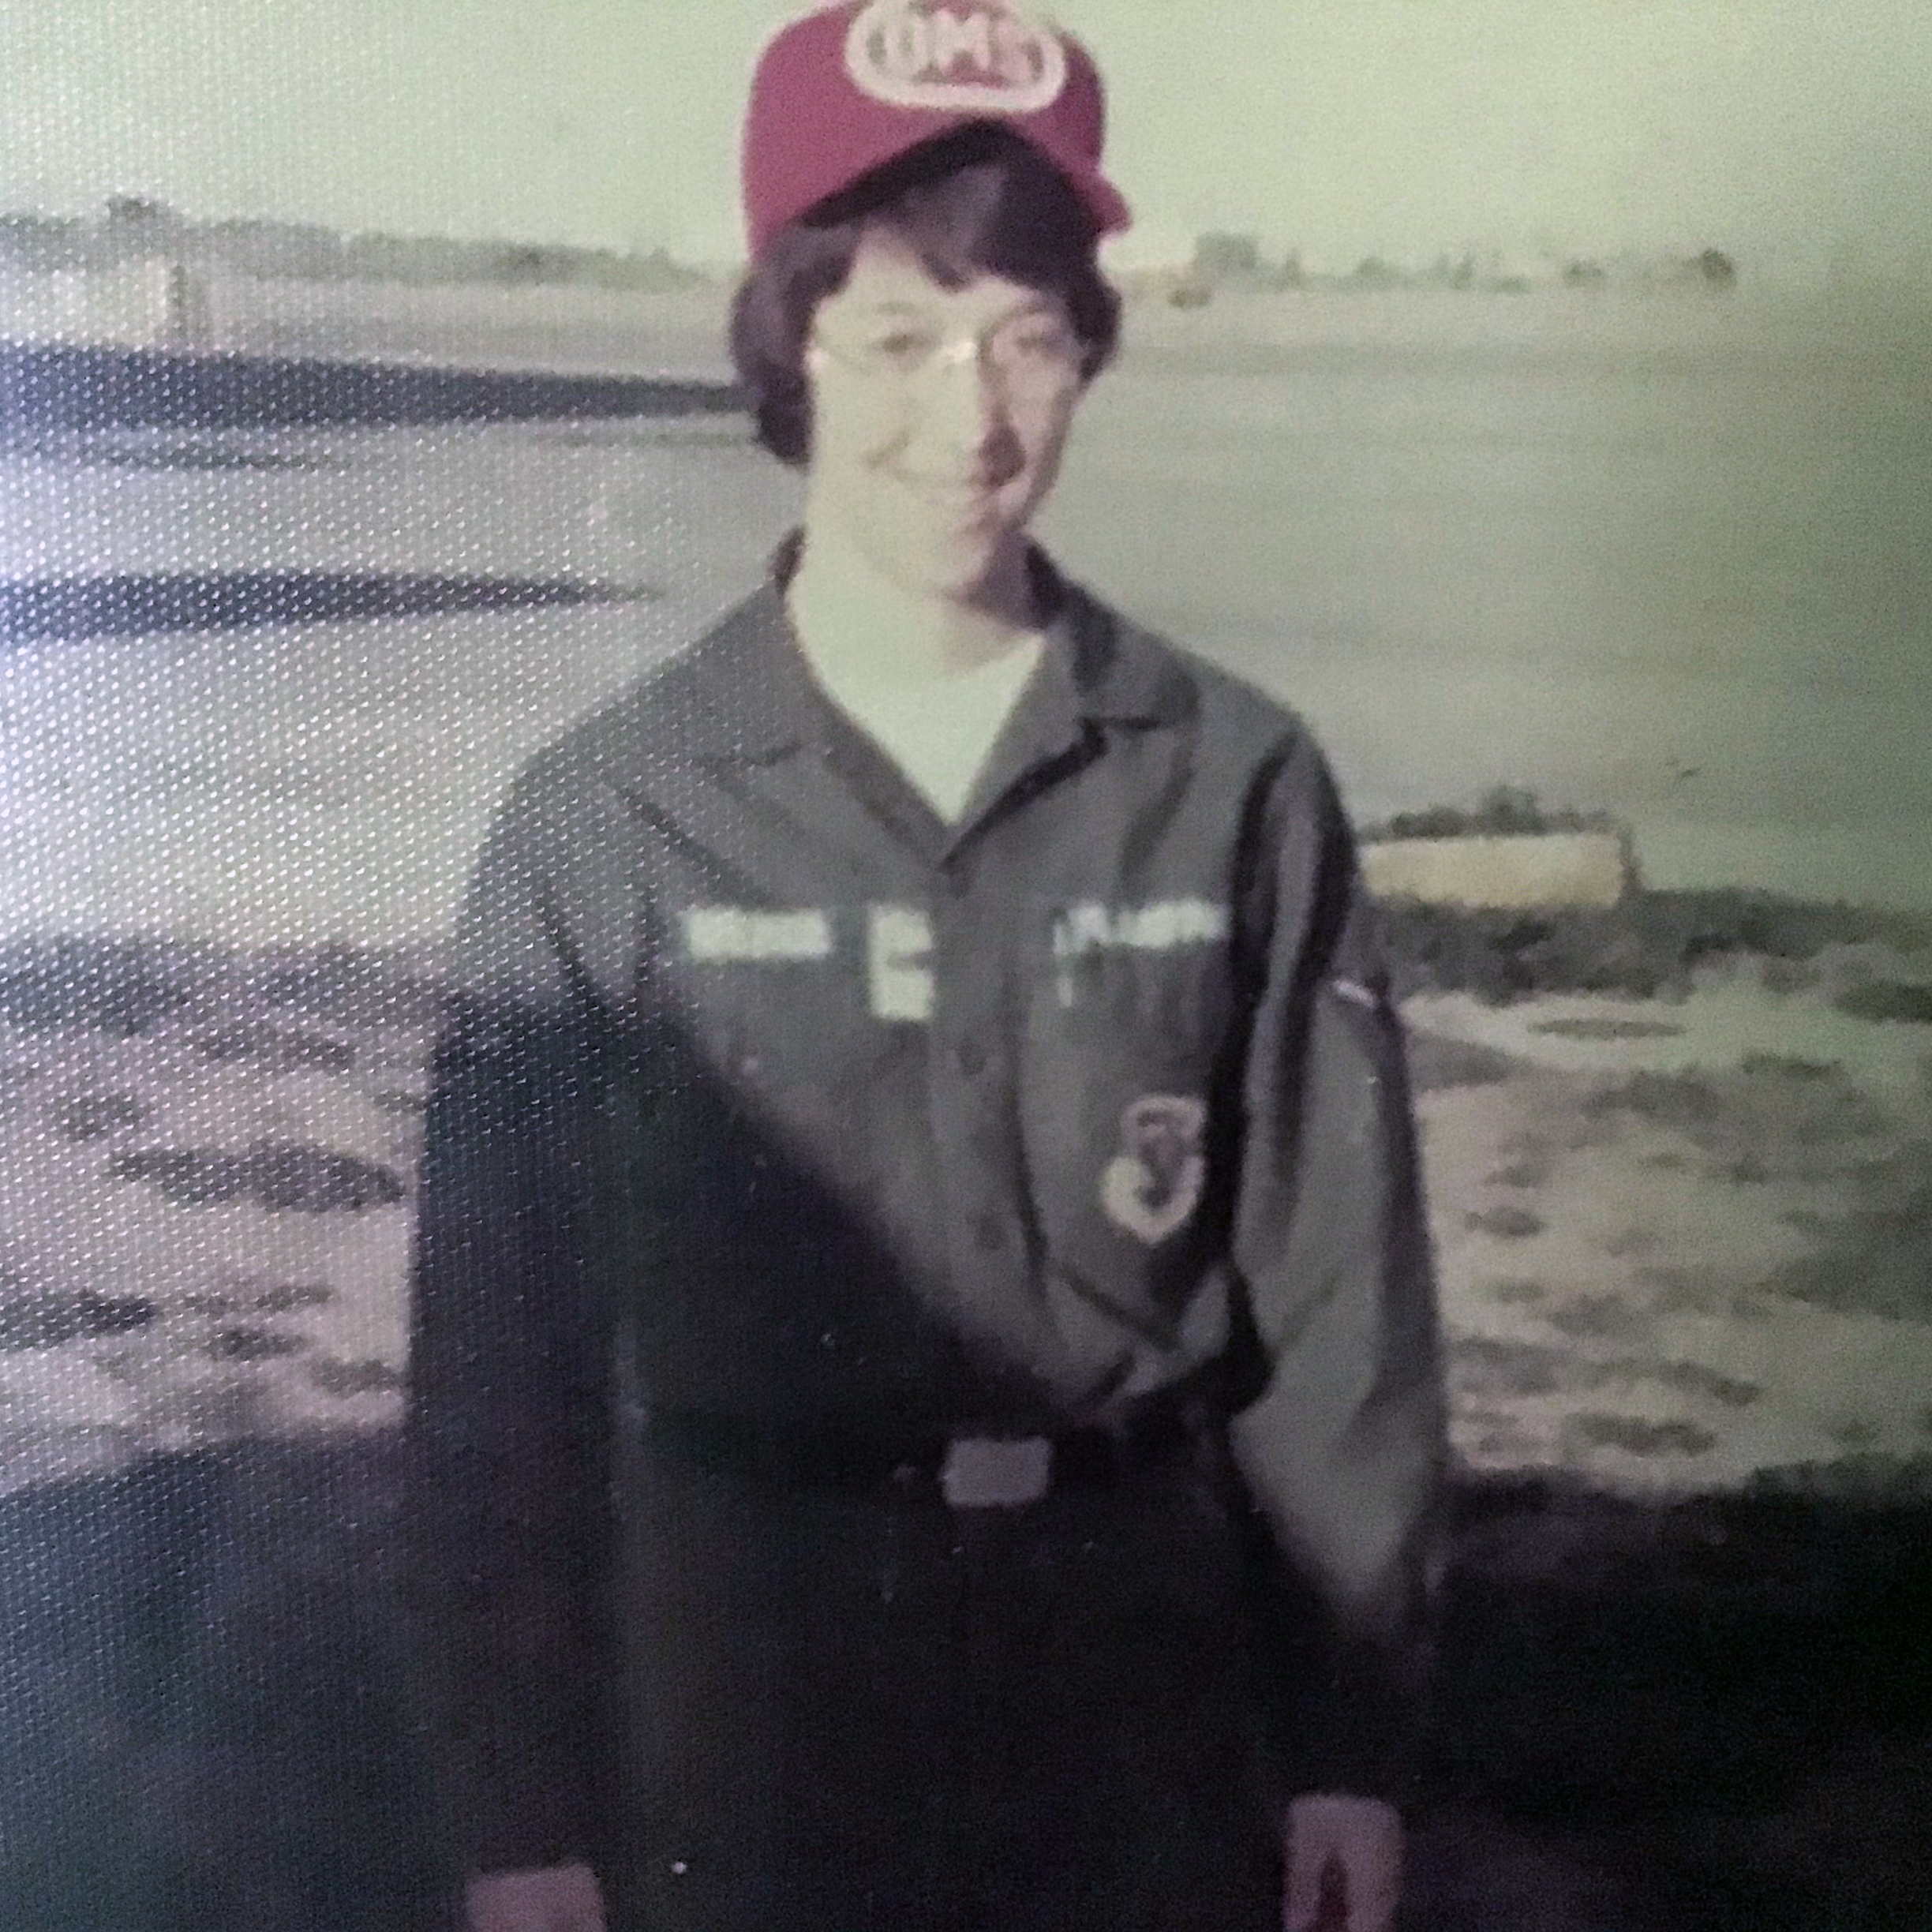 Rita Hollearn pictured in Air Force uniform on the flightline at Ellsworth Air Force Base in 1977.